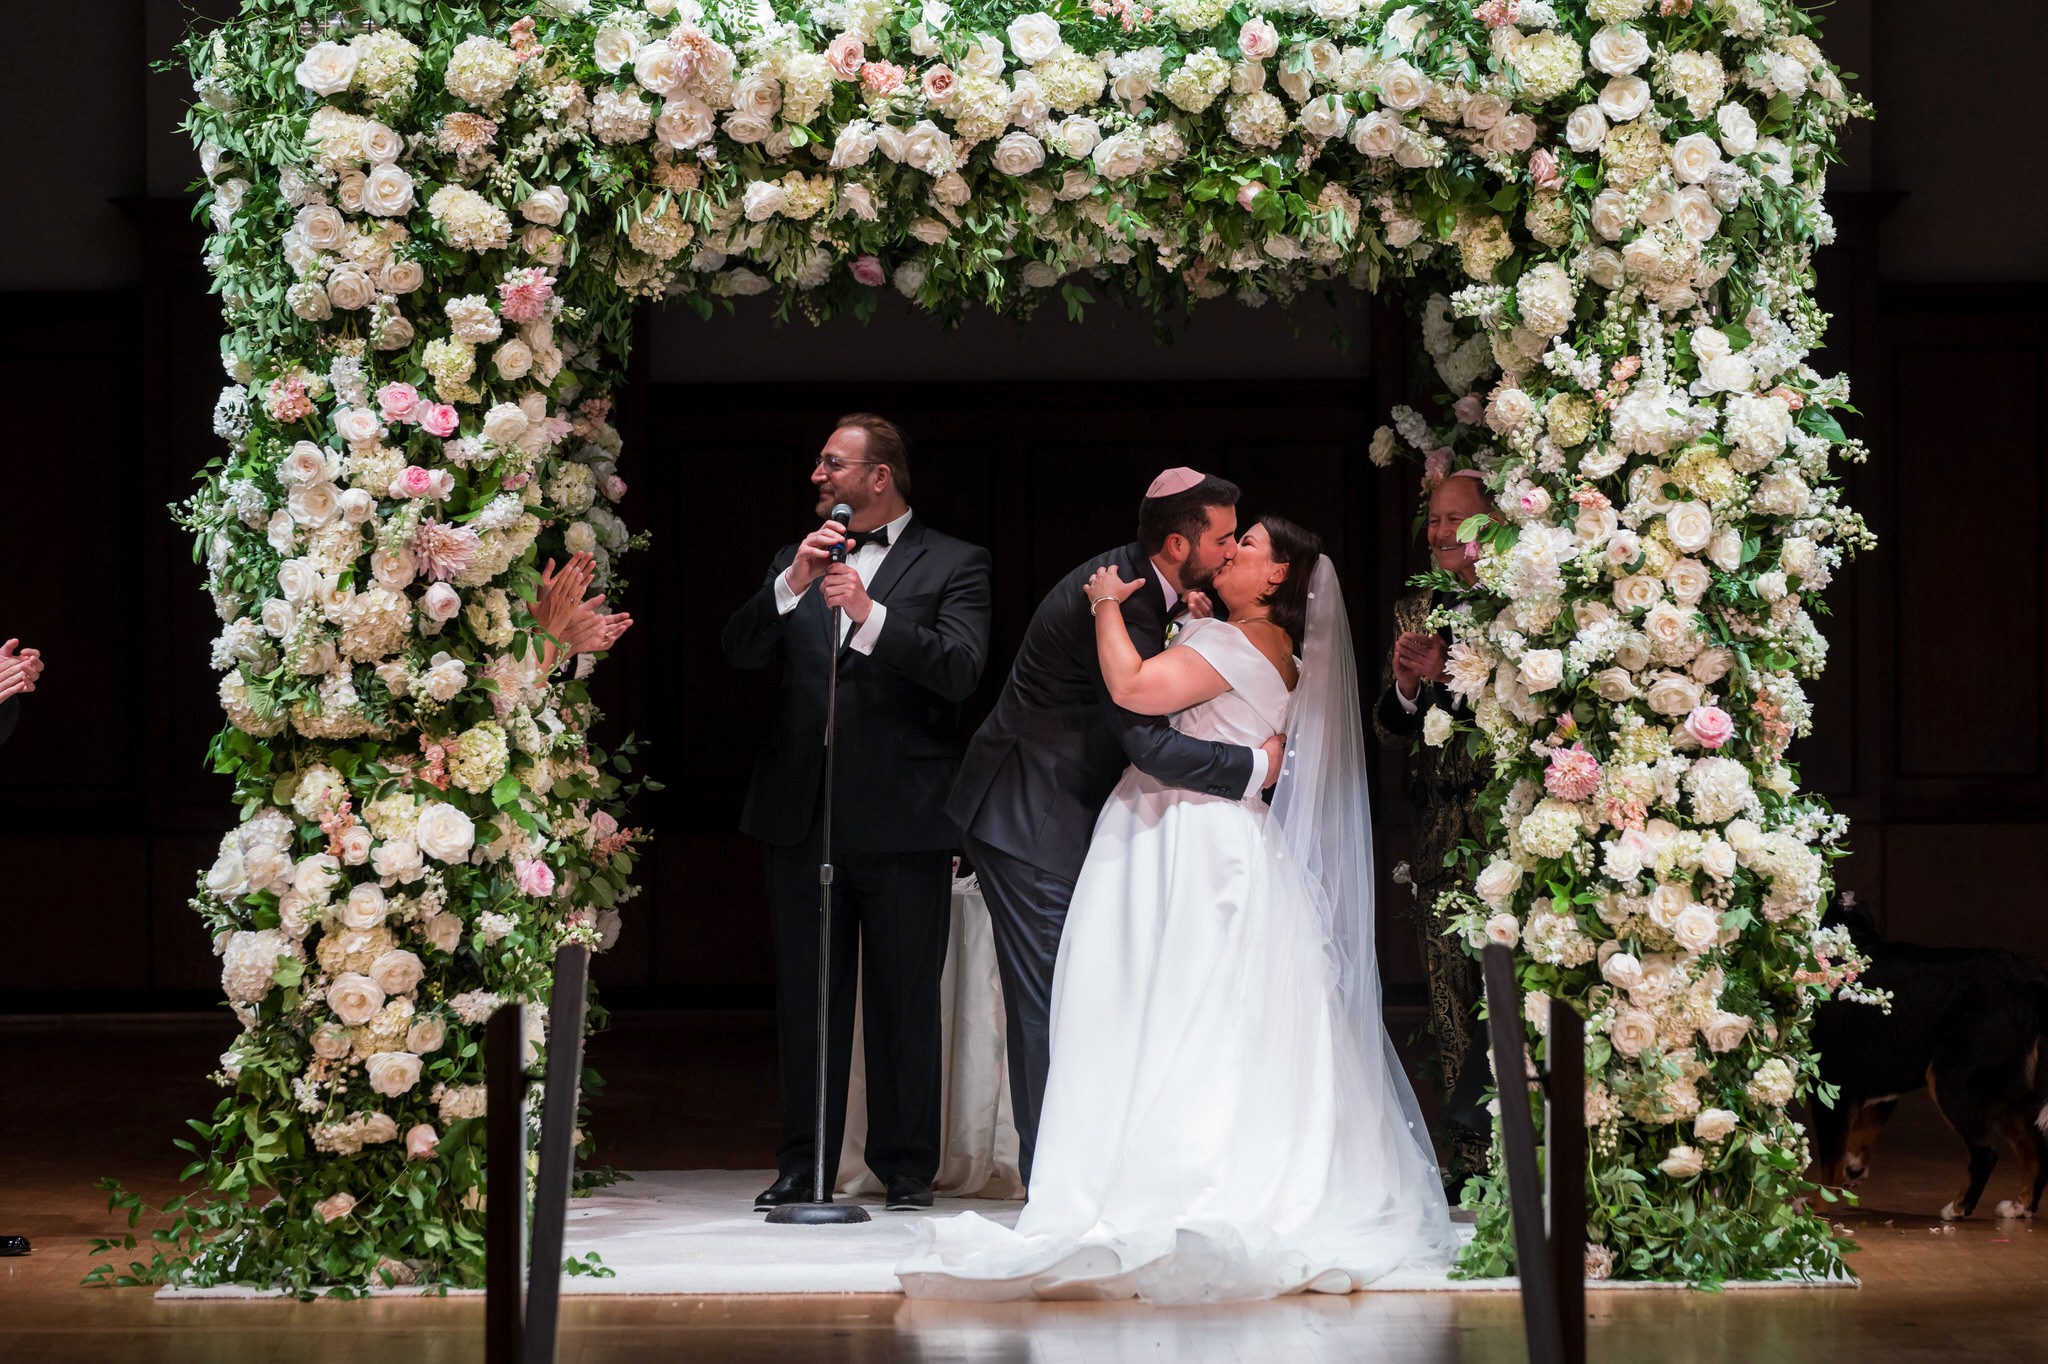 A jewish bride and groom kiss under a white chuppah at the Detroit Orchestra Hall wedding.  